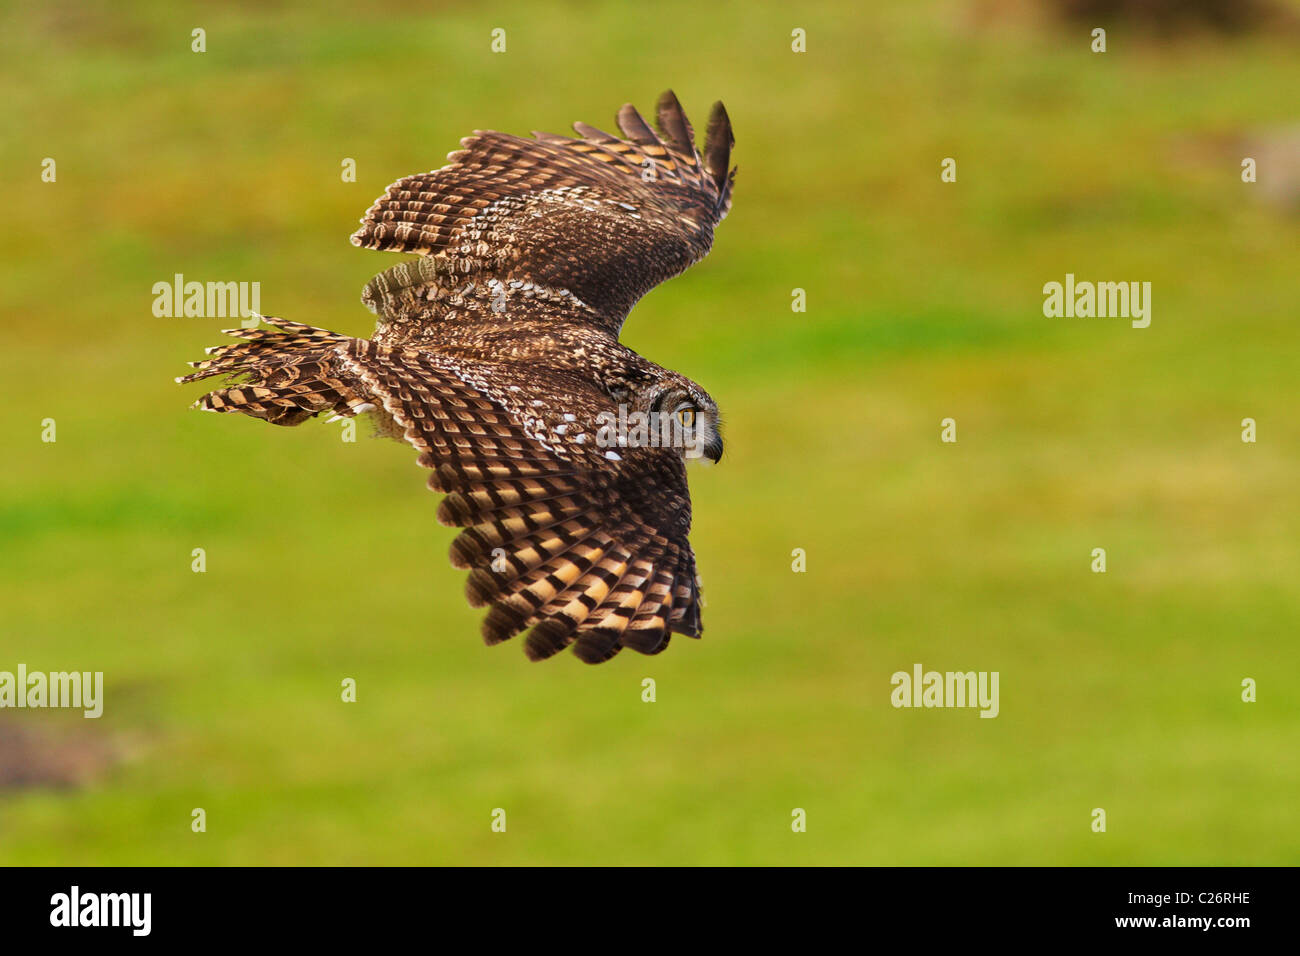 African Eagle Owl flying over a green field Stock Photo